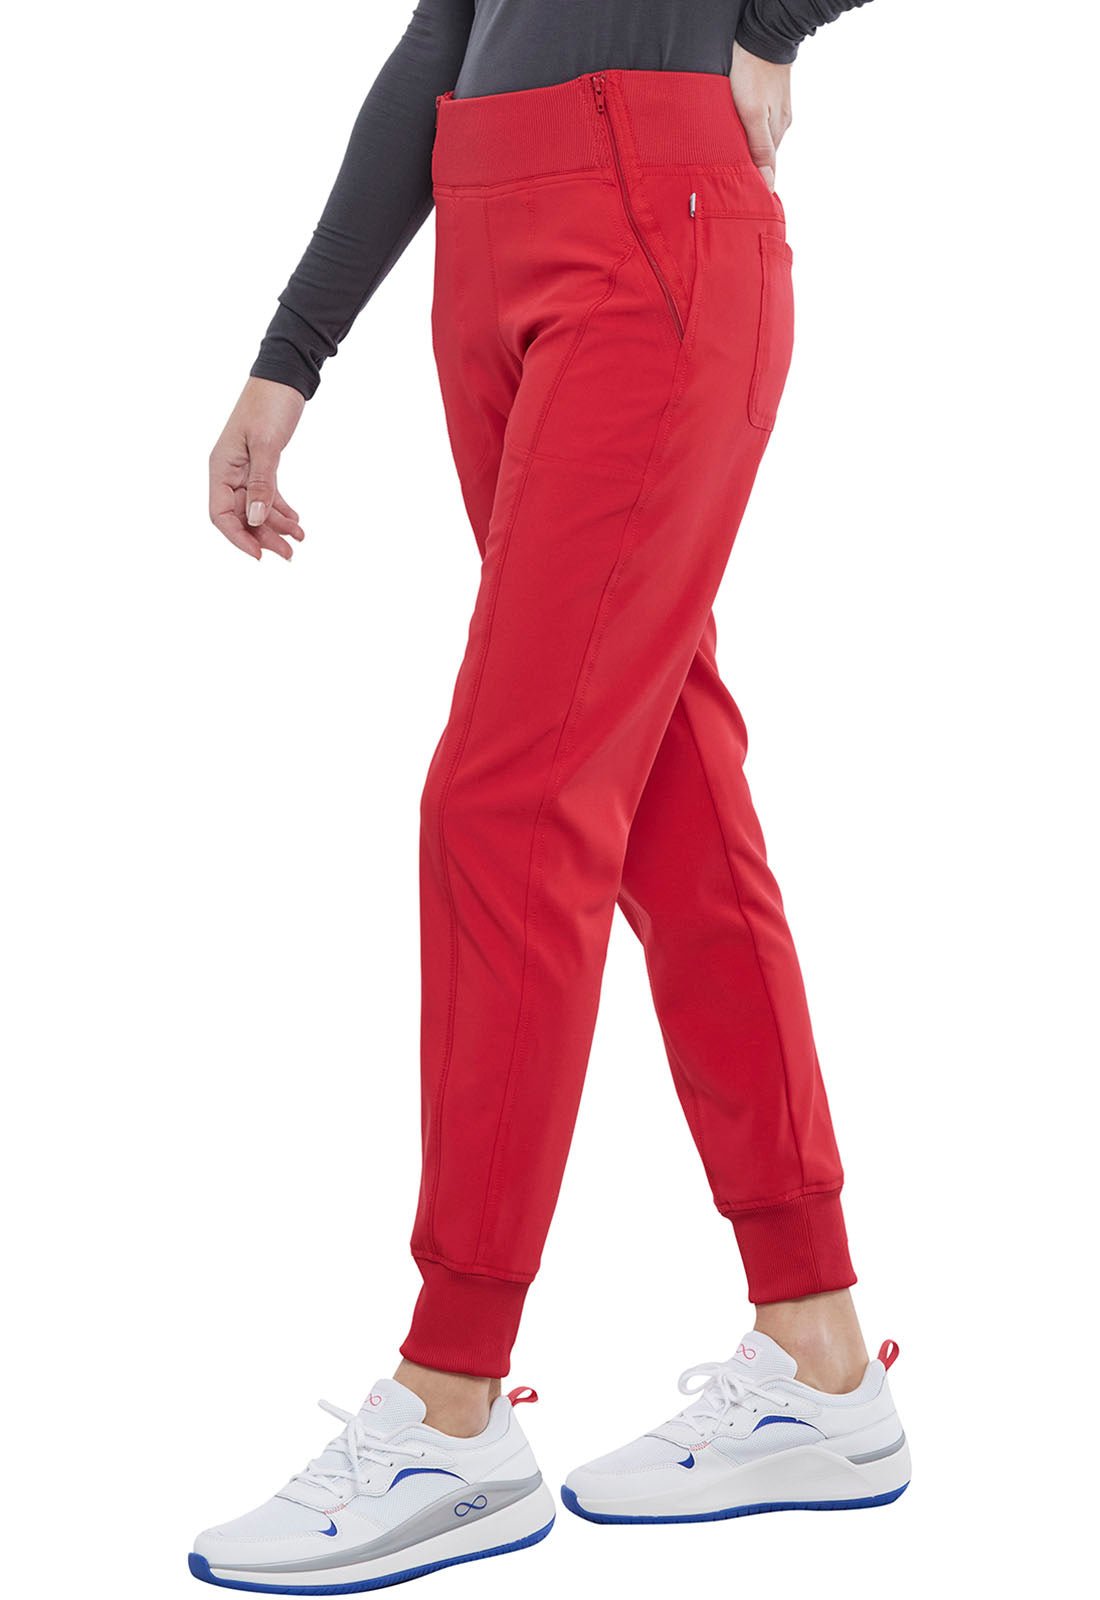 Cherokee Infinity Jogger Pant CK110A in Carmine Pink, Hunter, Red, White - Scrubs Select